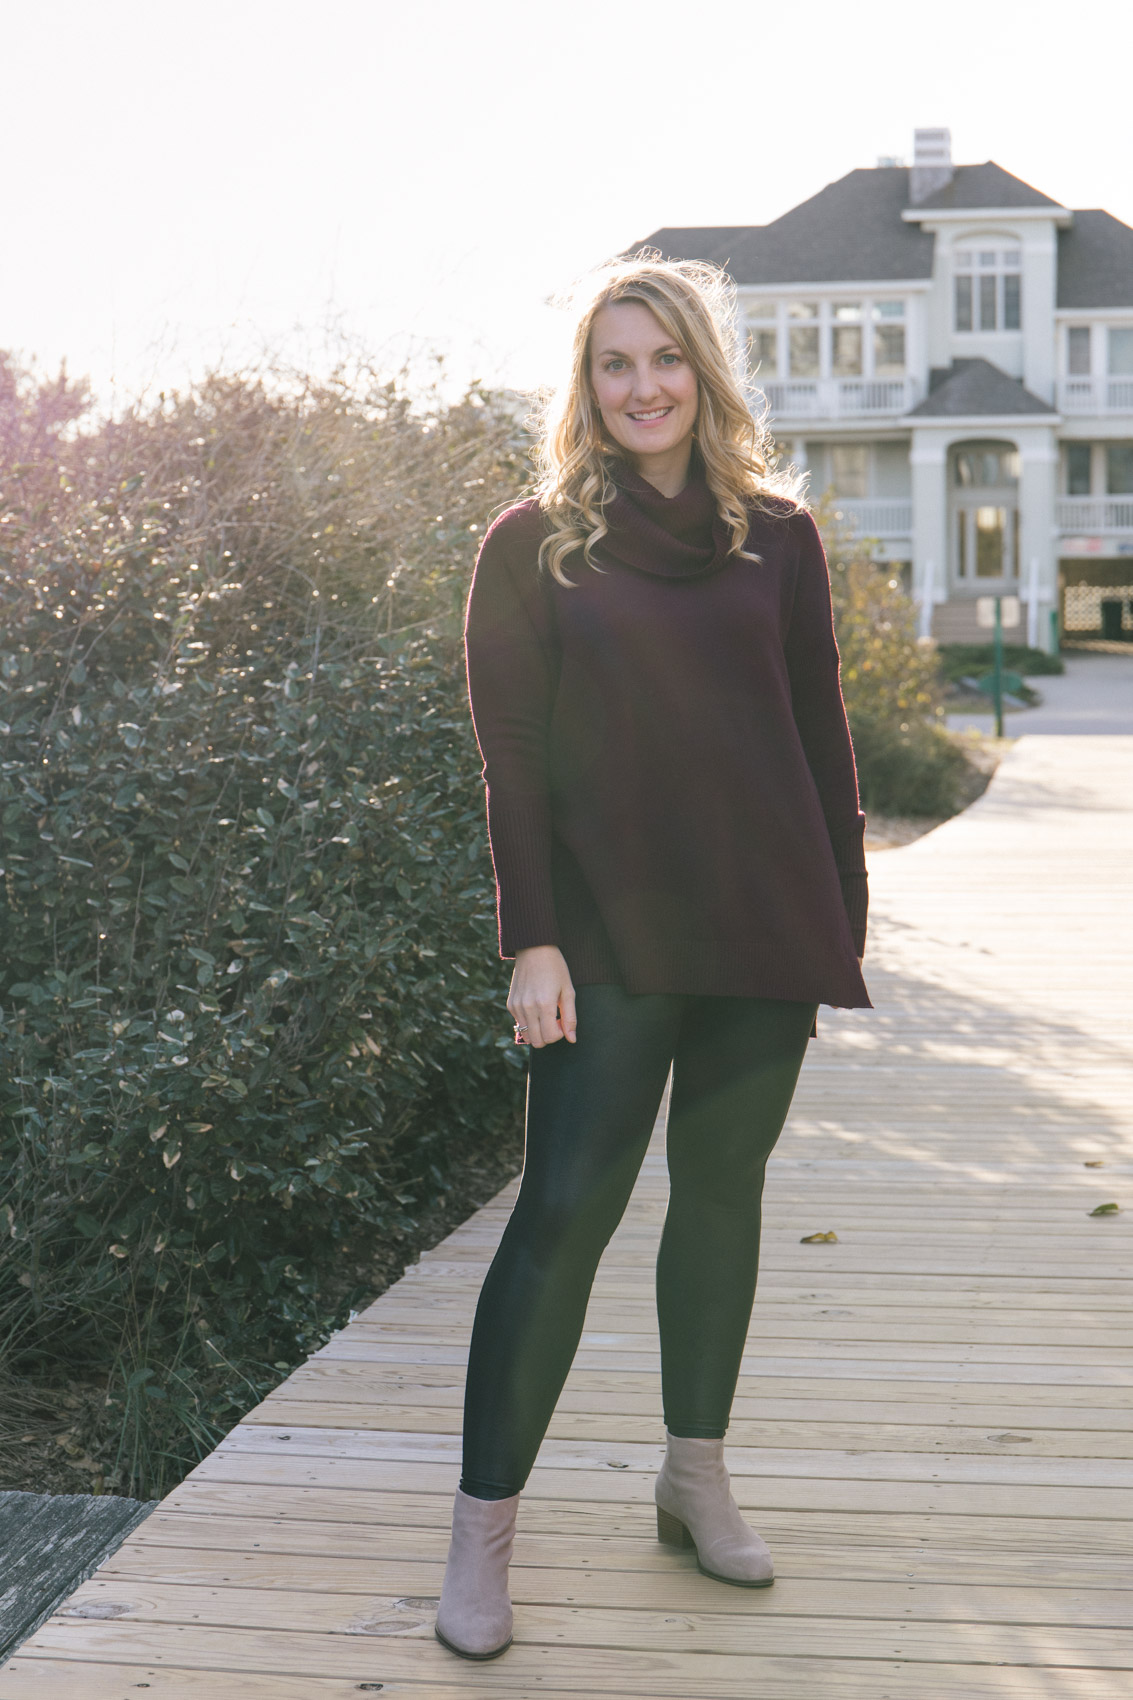 Allyn Lewis styles a casual outfit with faux leather leggings by Spanx